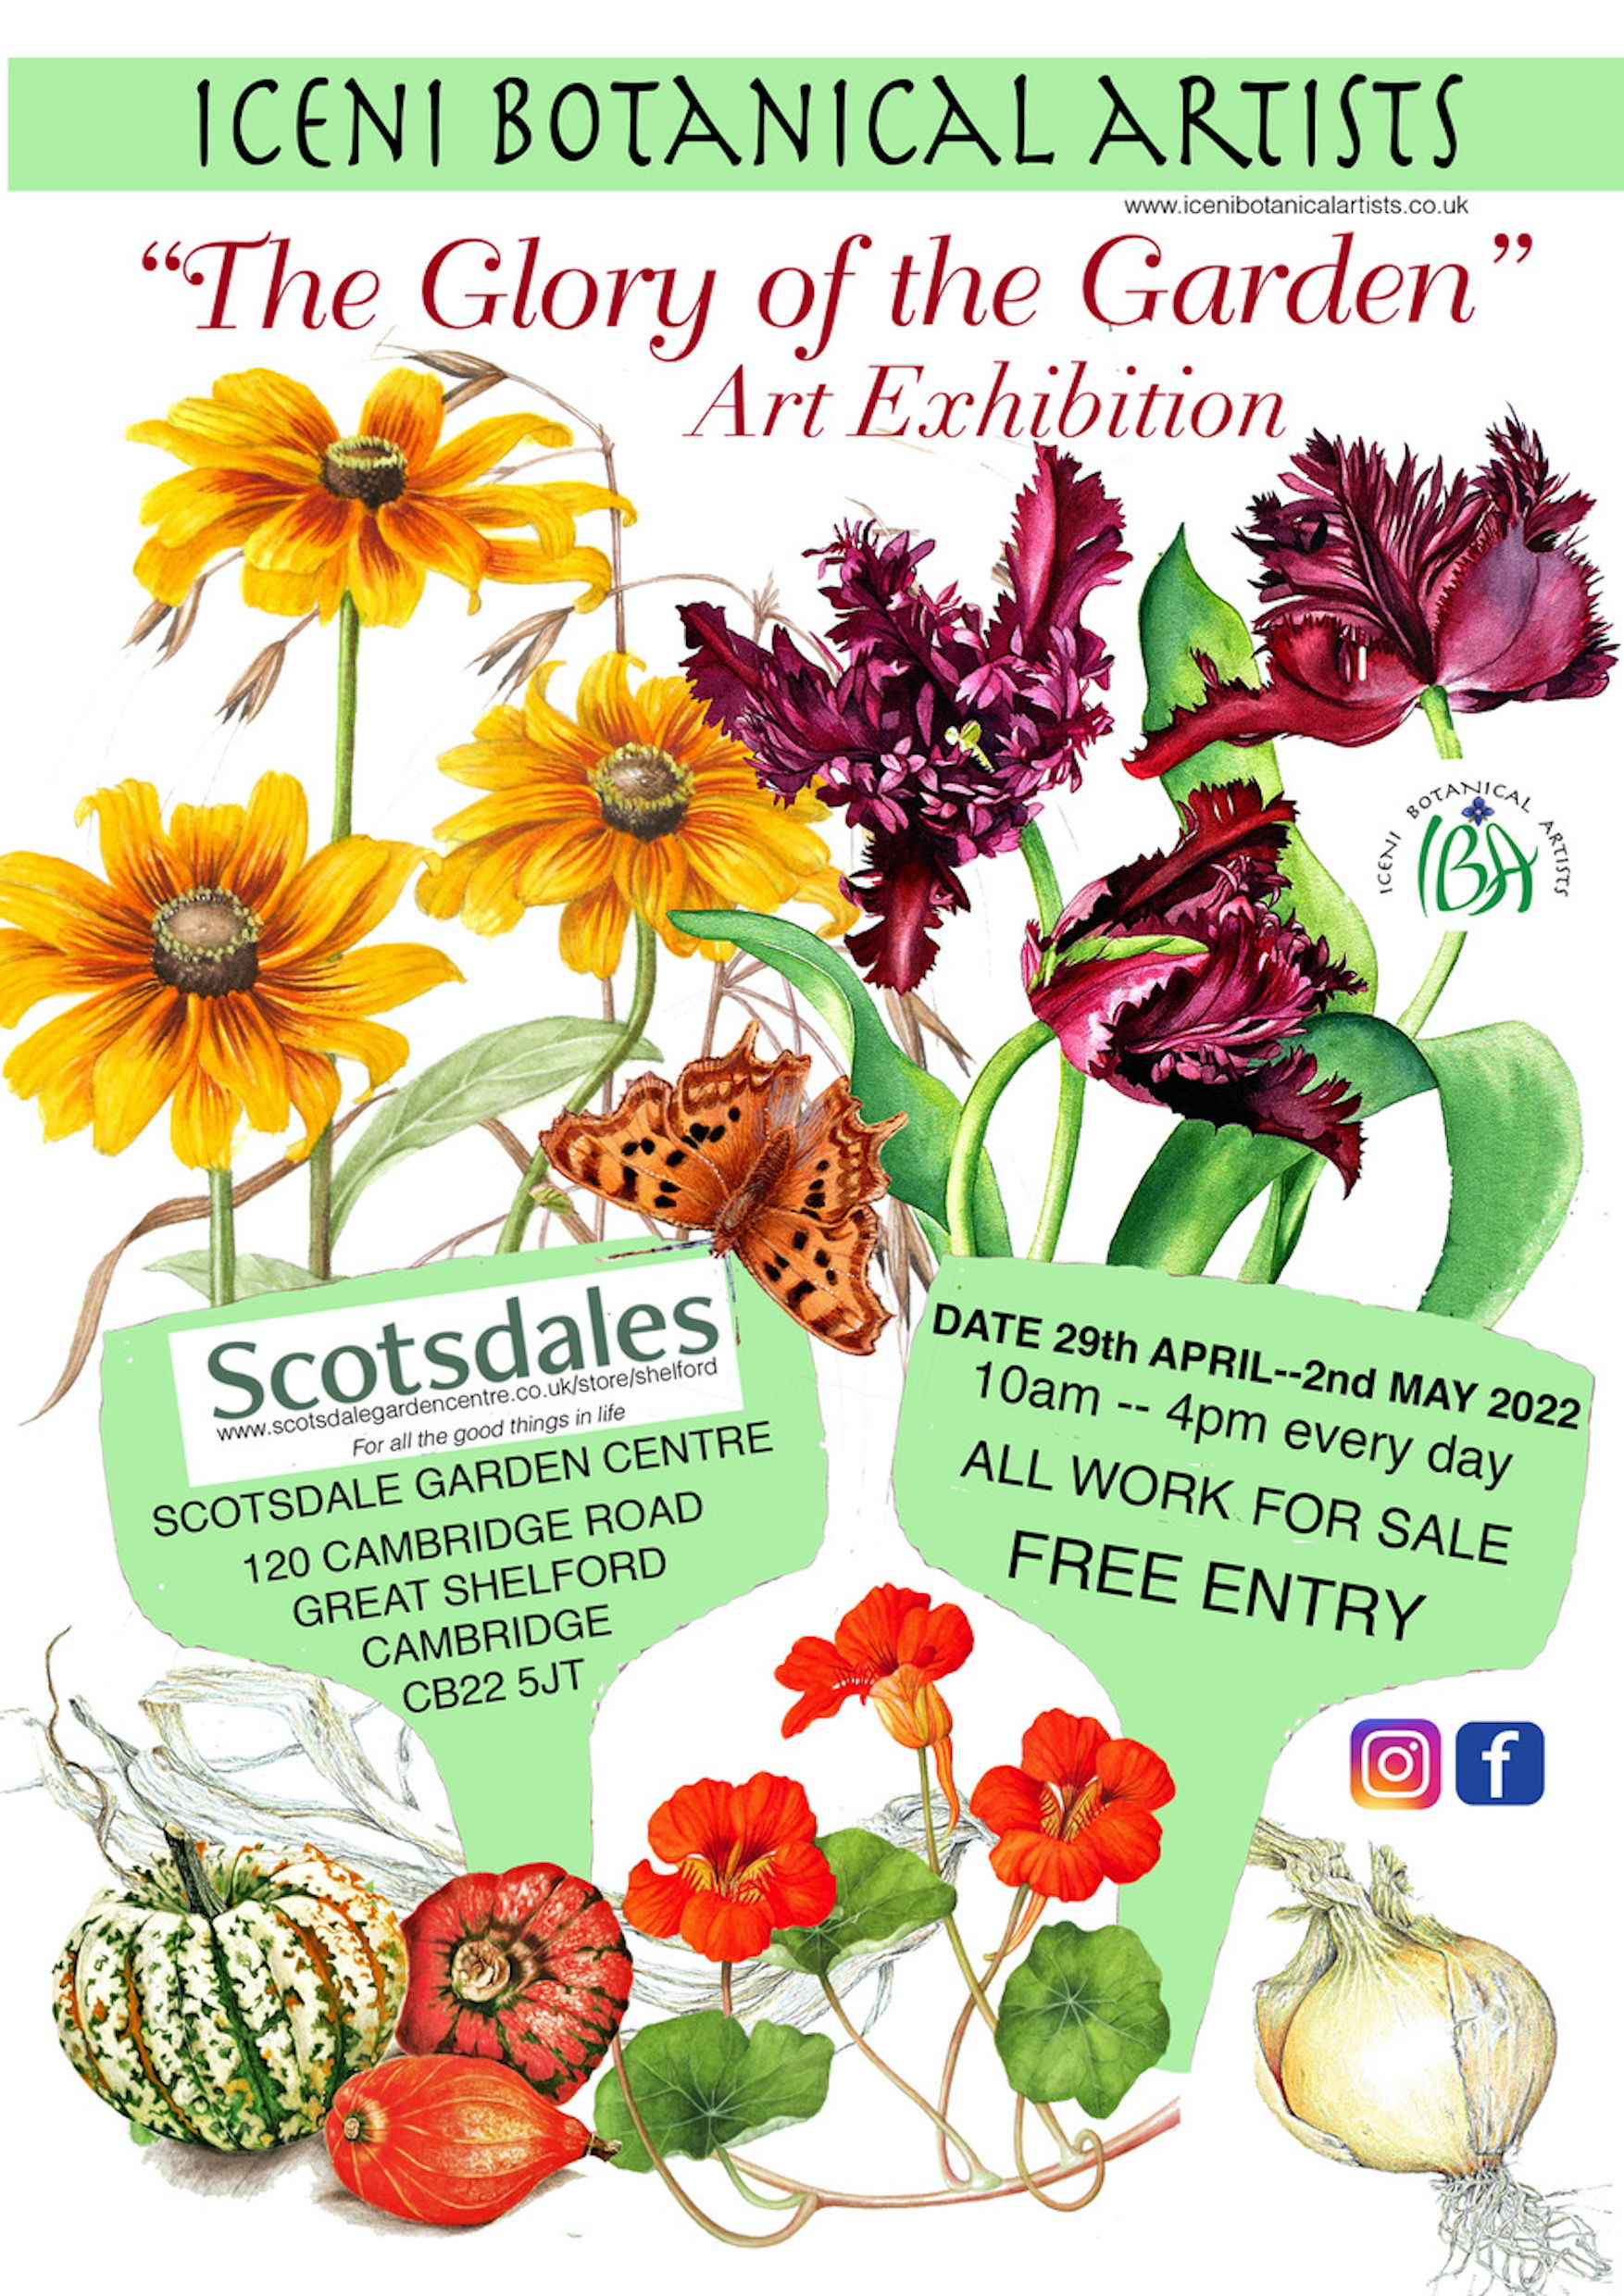 Exhibition at Scotsdale Garden Centre - The Glory of the Garden